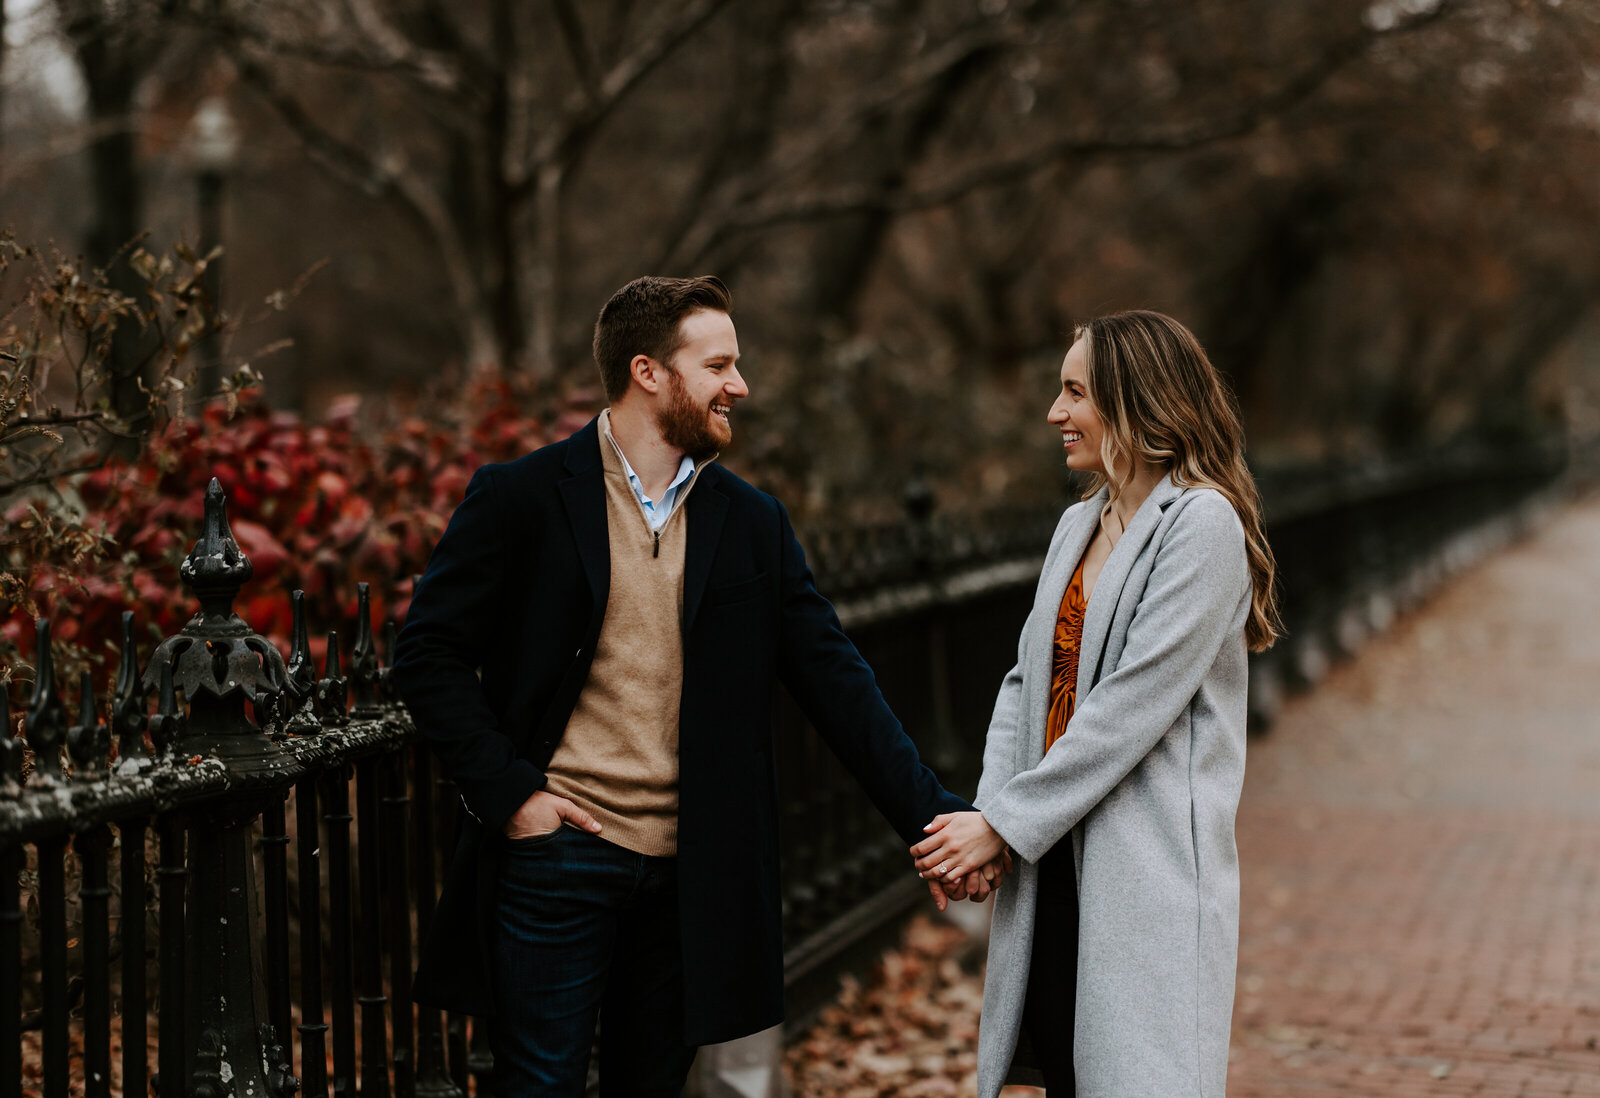 Bride and groom hold hands and look towards each other during engagement session in Boston, Massachusetts